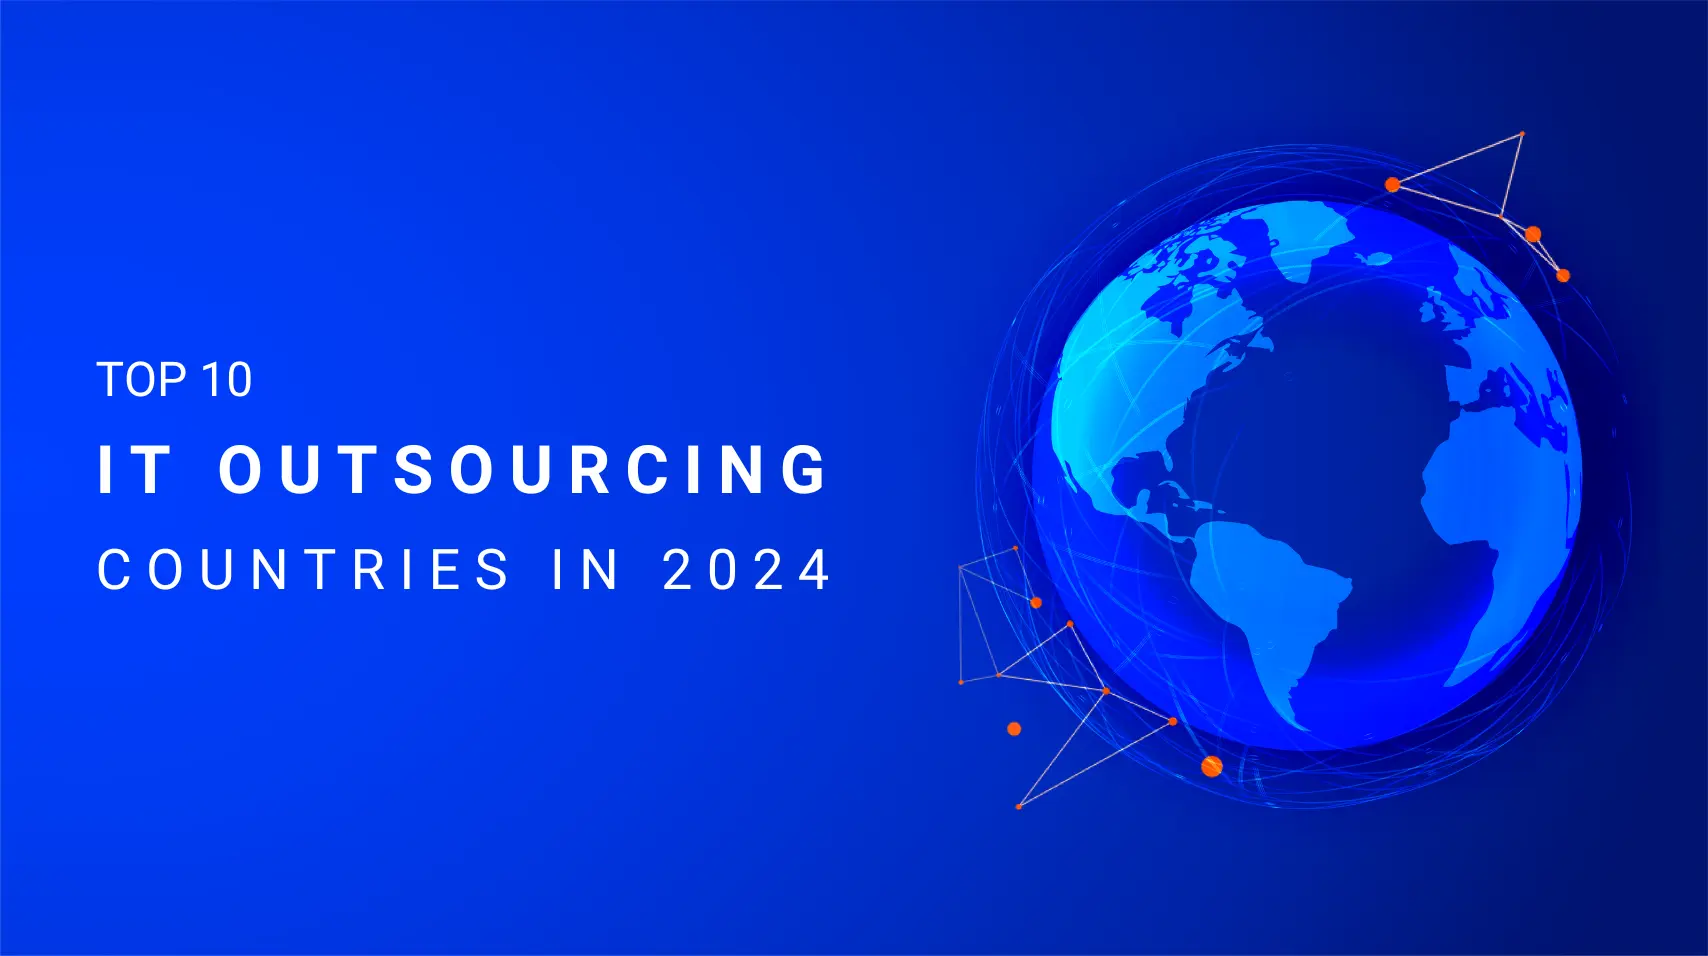 Top 10 IT outsourcing countries